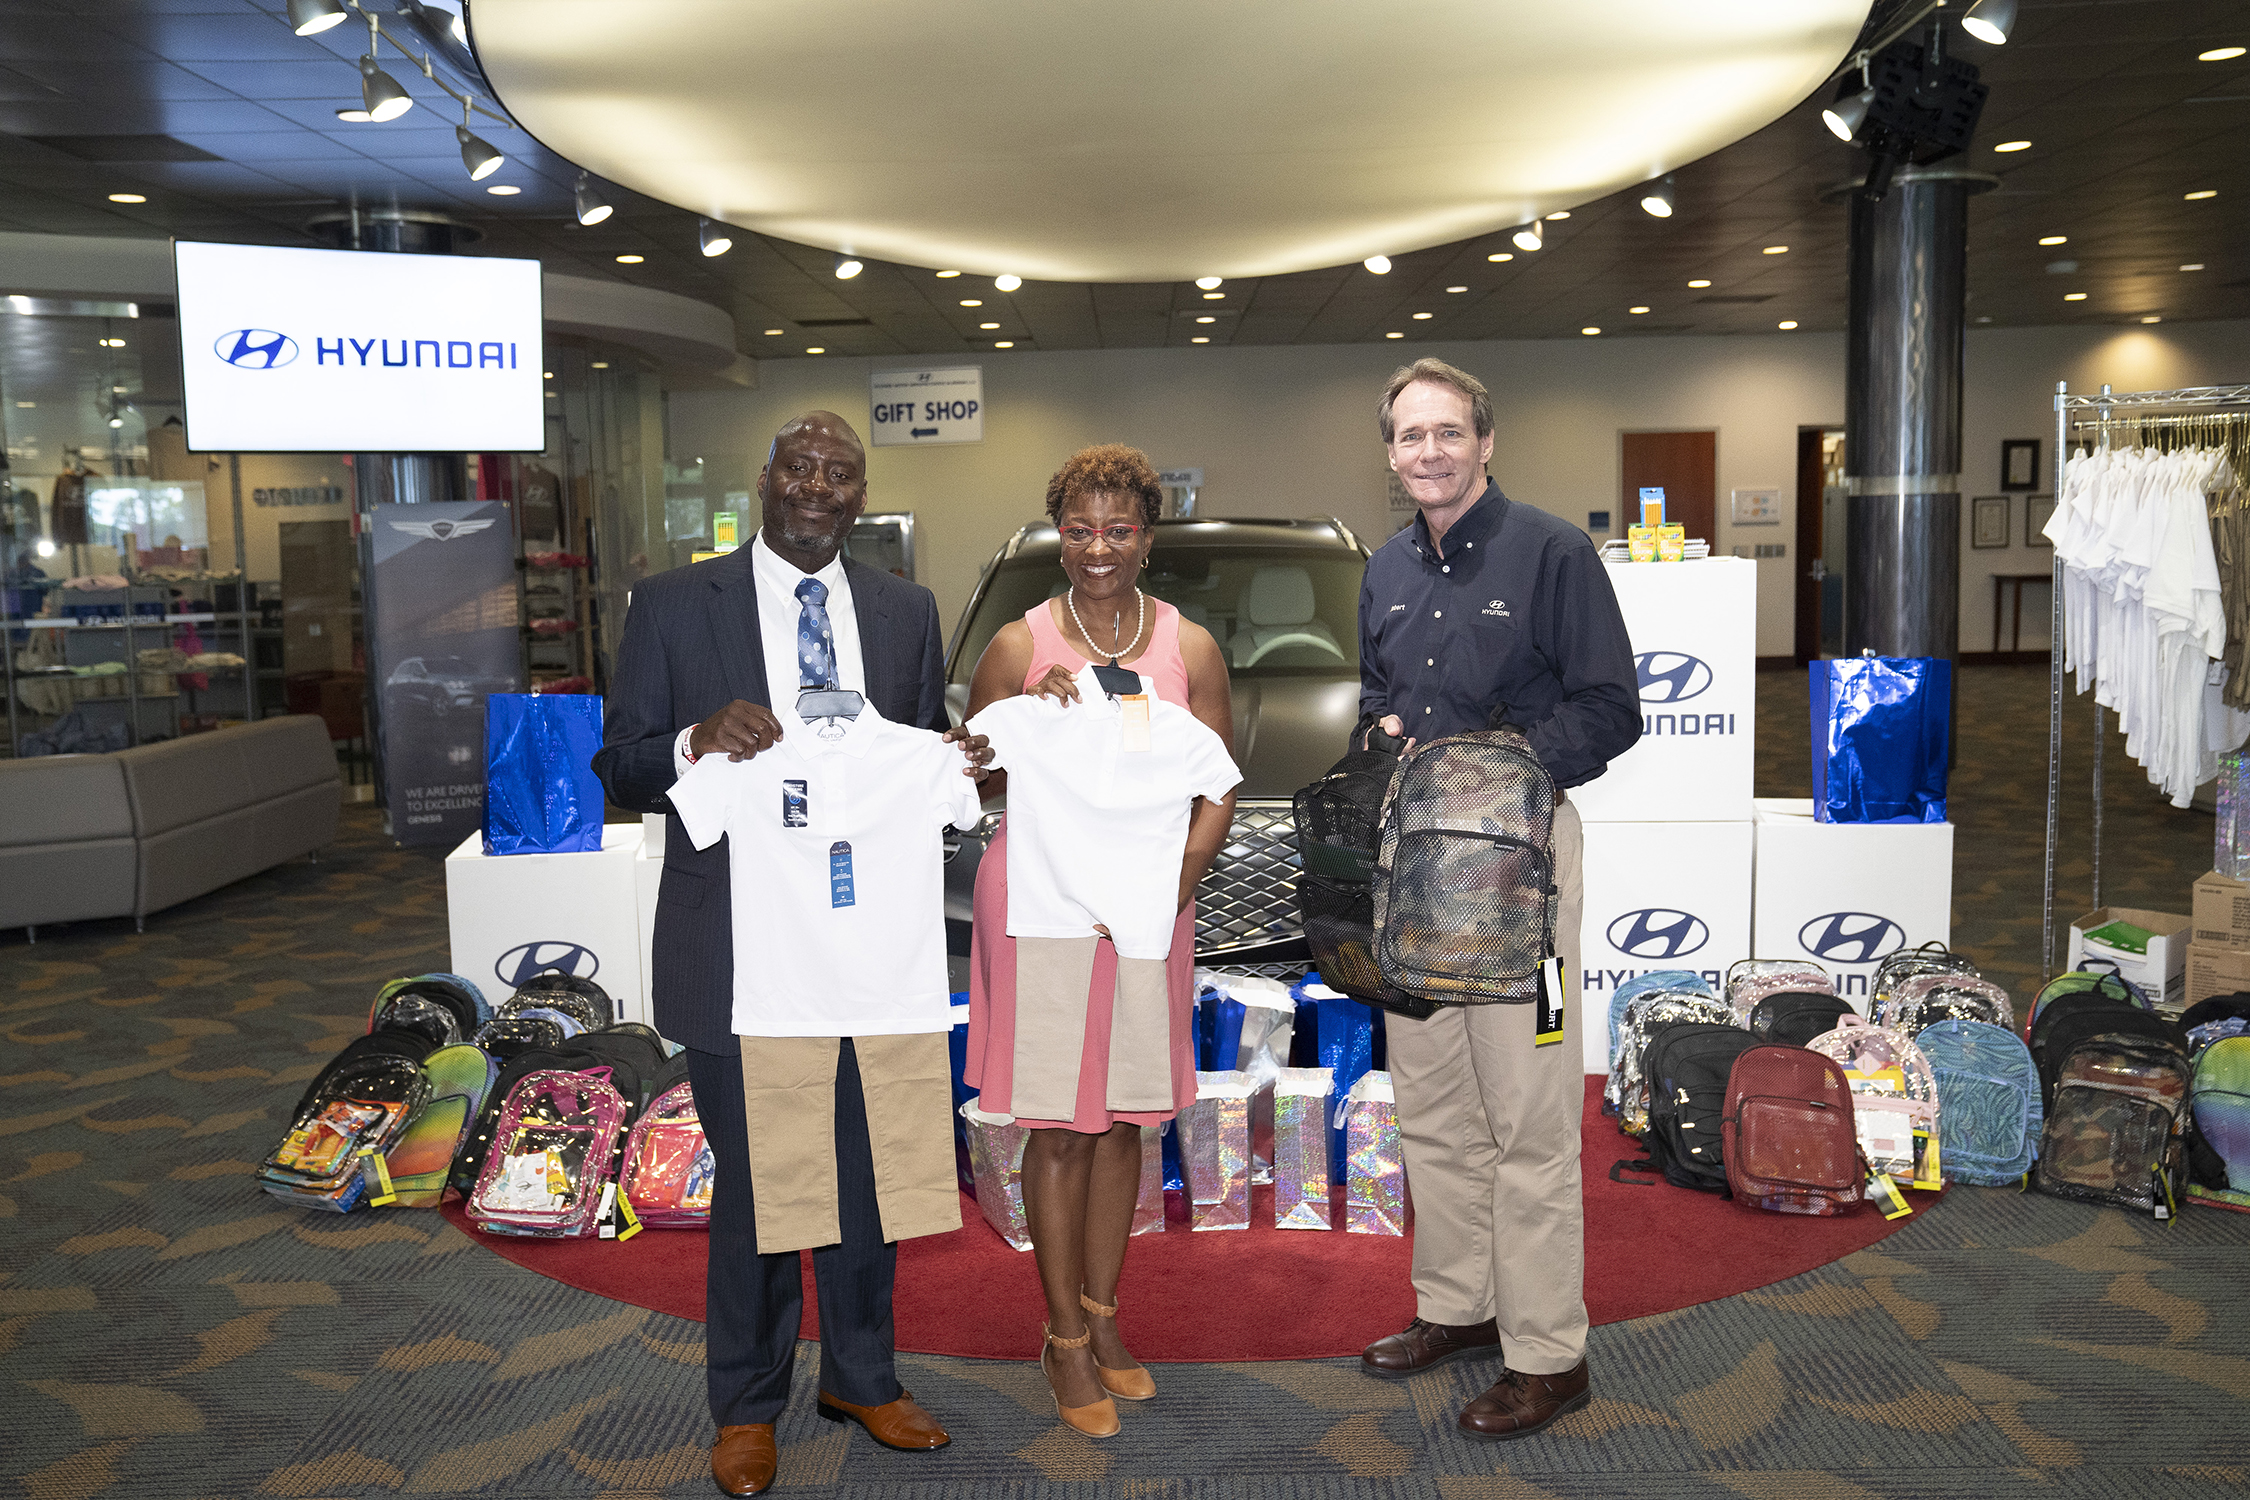 HMMA TEAM MEMBERS DONATE SUPPLIES AND UNIFORMS FOR SELMA CITY SCHOOLS